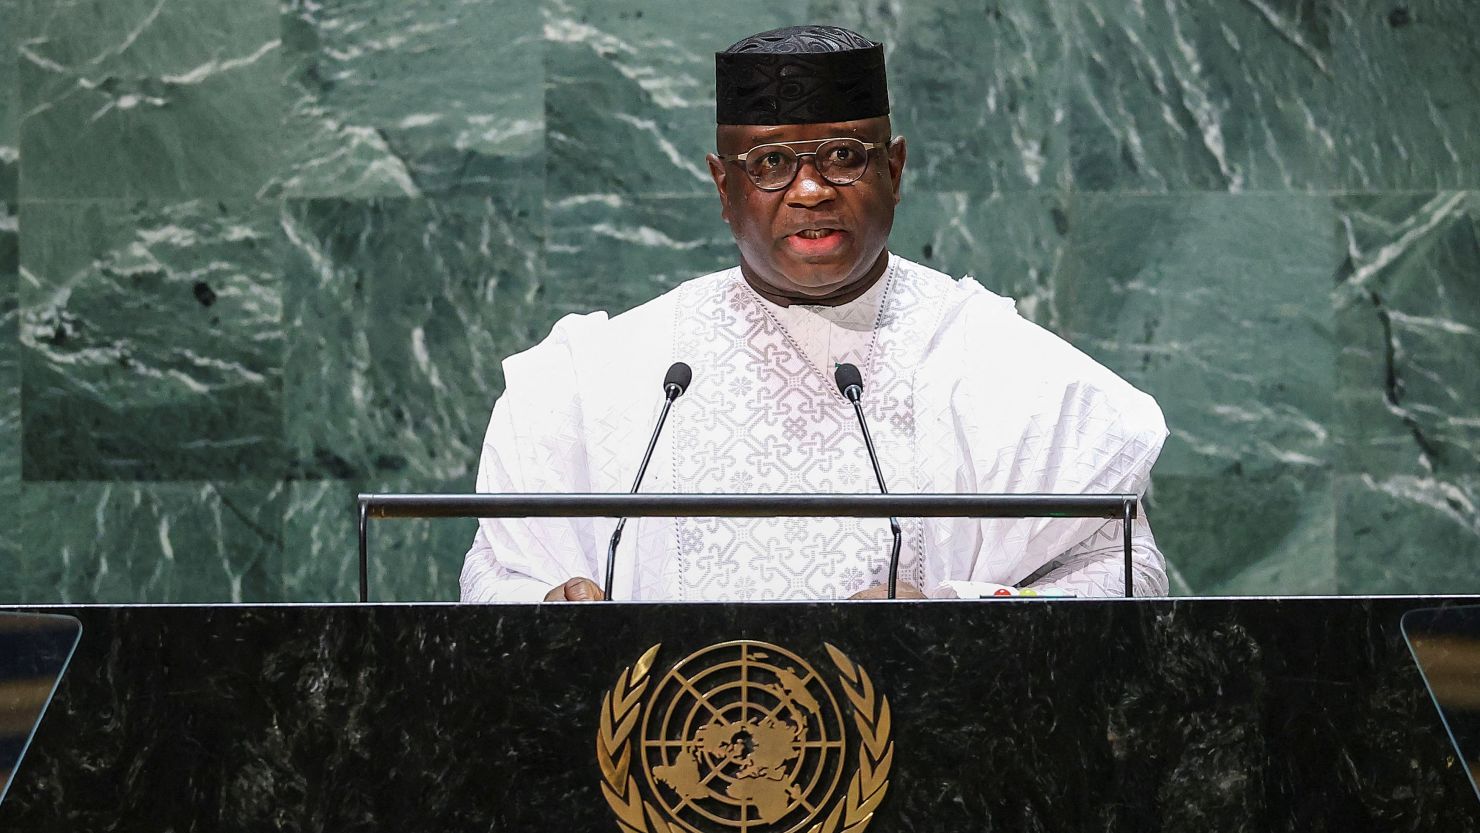 Sierra Leone's President Julius Maada Bio deplored “the destructive consequences of kush on our country’s very foundation: our young people.”